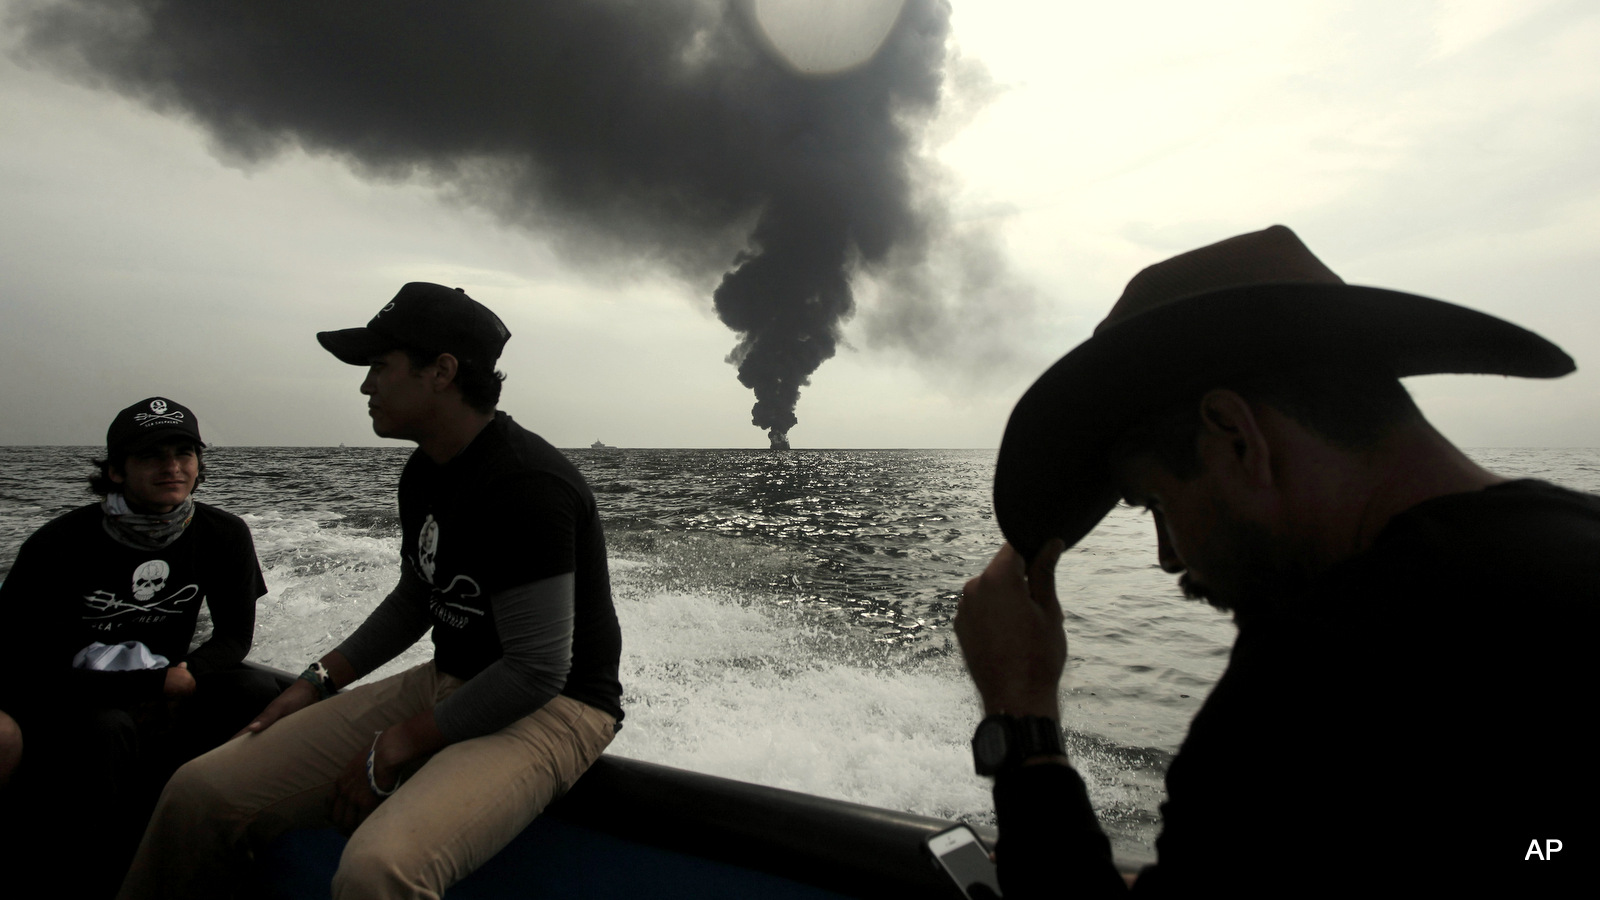 Members of the marine wildlife conservation organization Sea Shepherd monitor the fuel tanker Burgos, as it continues to burn a day after it erupted in flames off the coast of the port city of Boca del Rio, Mexico, Sunday Sept. 25, 2016. Firefighting boats were battling the blaze aboard the Burgos, which is owned by state oil company Petroleos Mexicanos, or Pemex. Pemex said in a statement Sunday that a team of international experts in putting out fires and transferring fuel has arrived to assist.